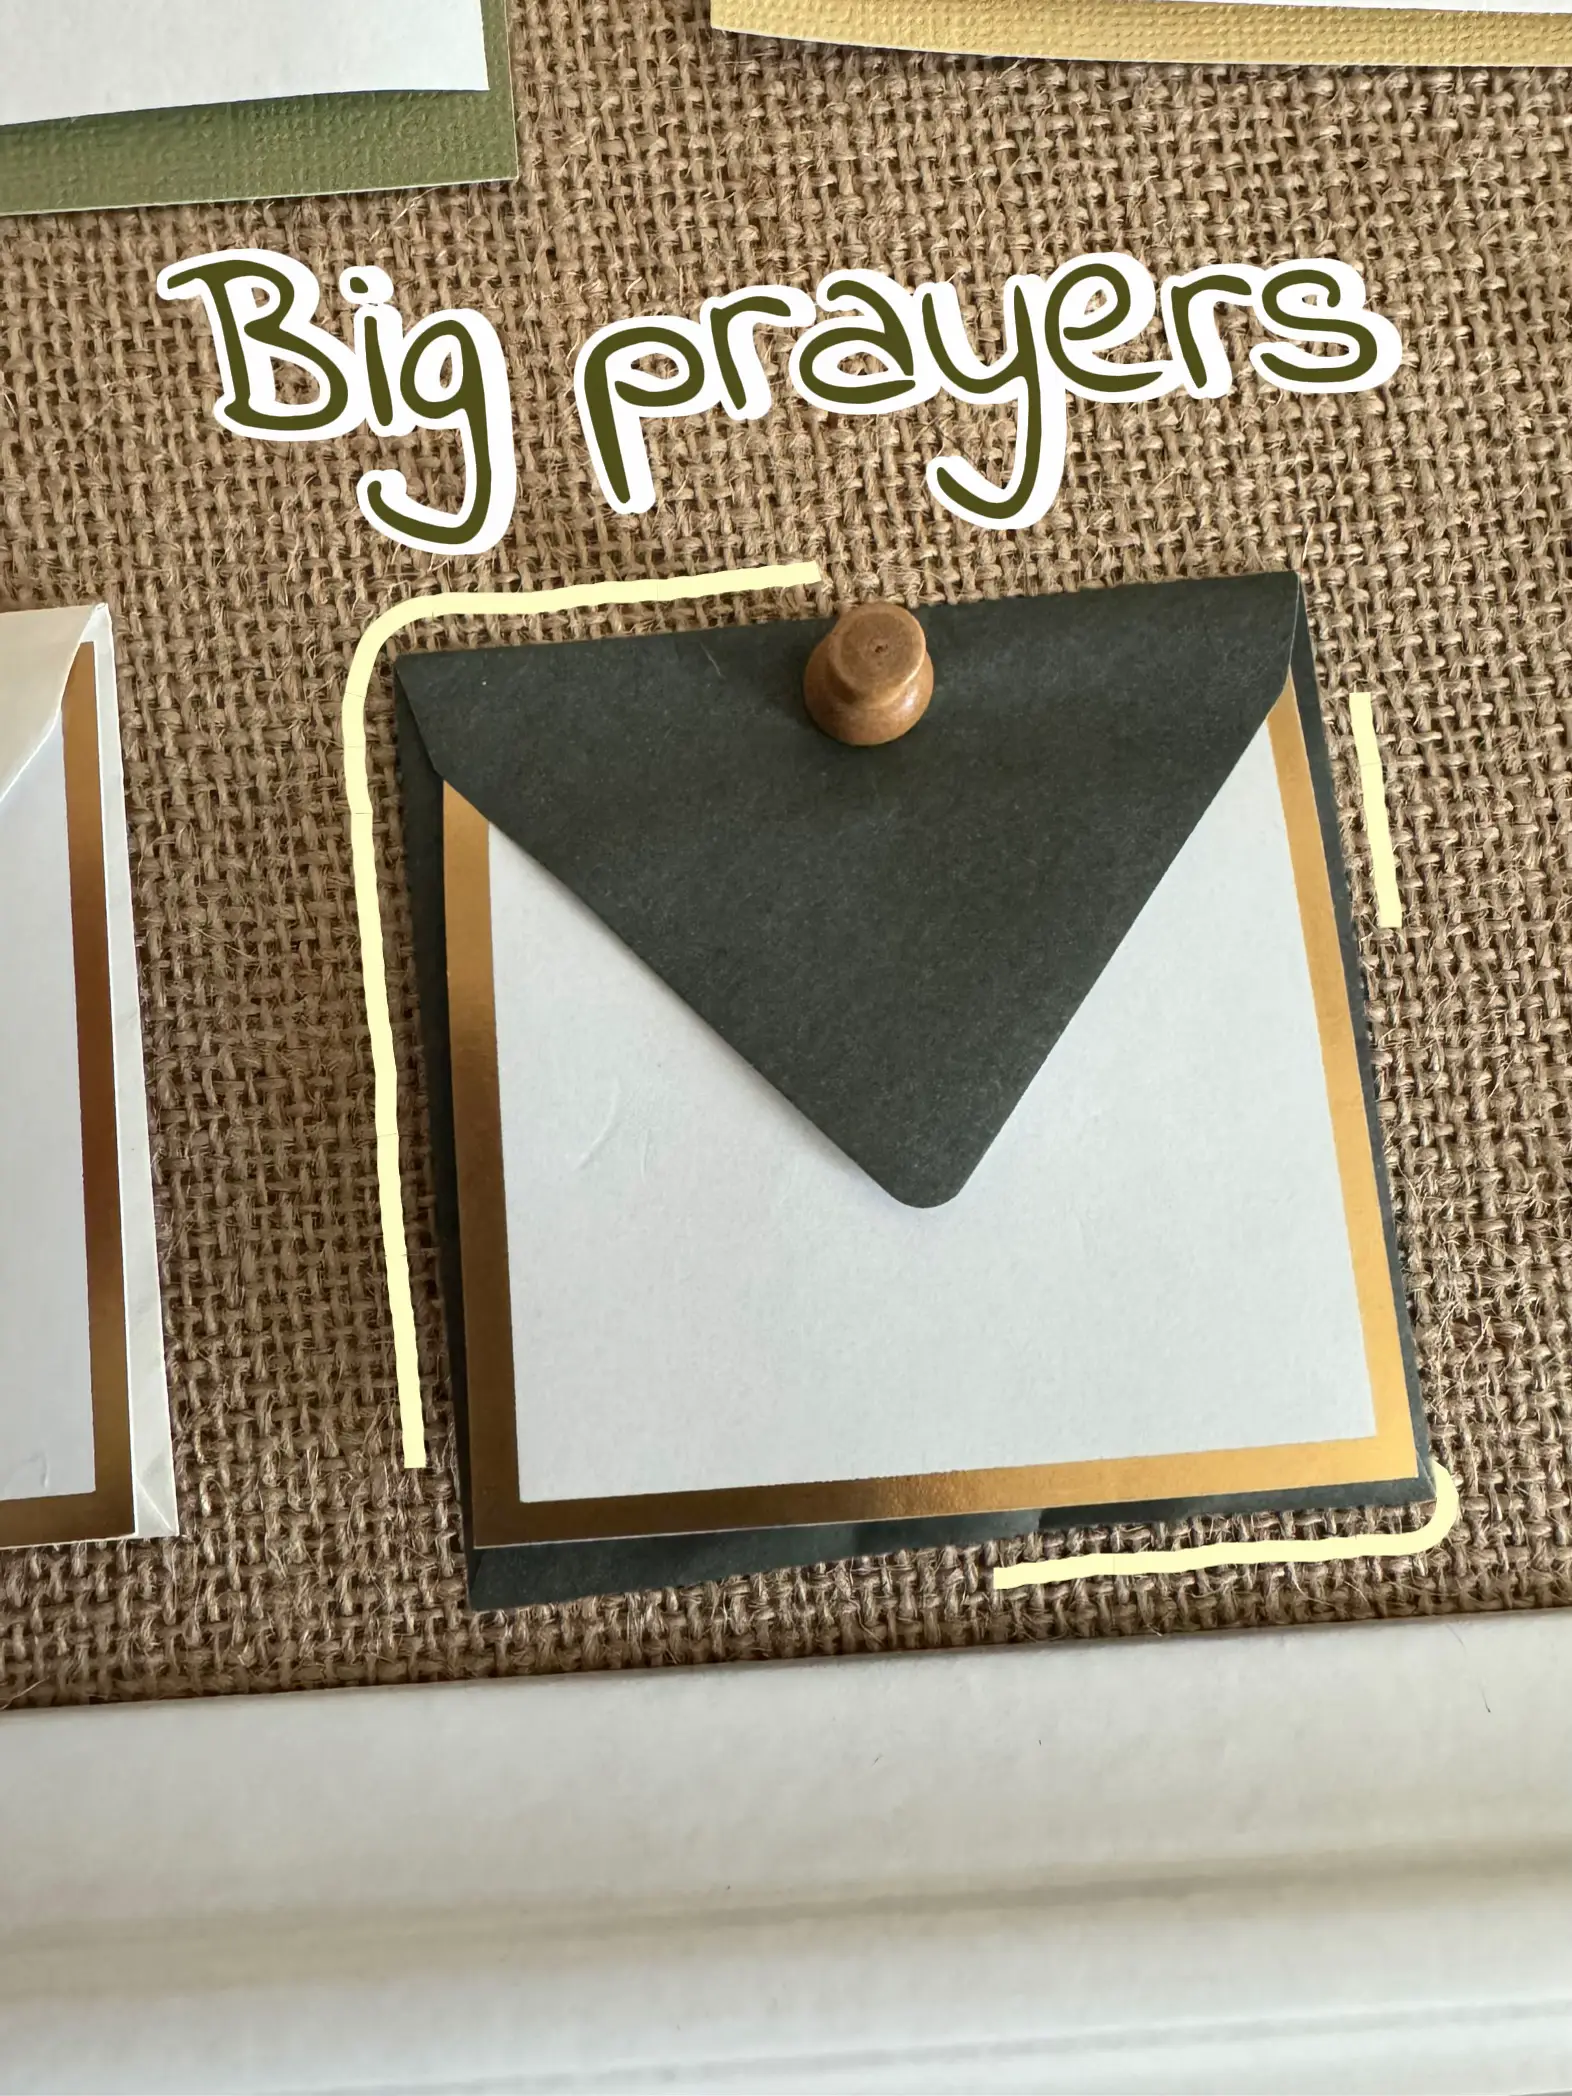 Top 10 prayer board ideas and inspiration